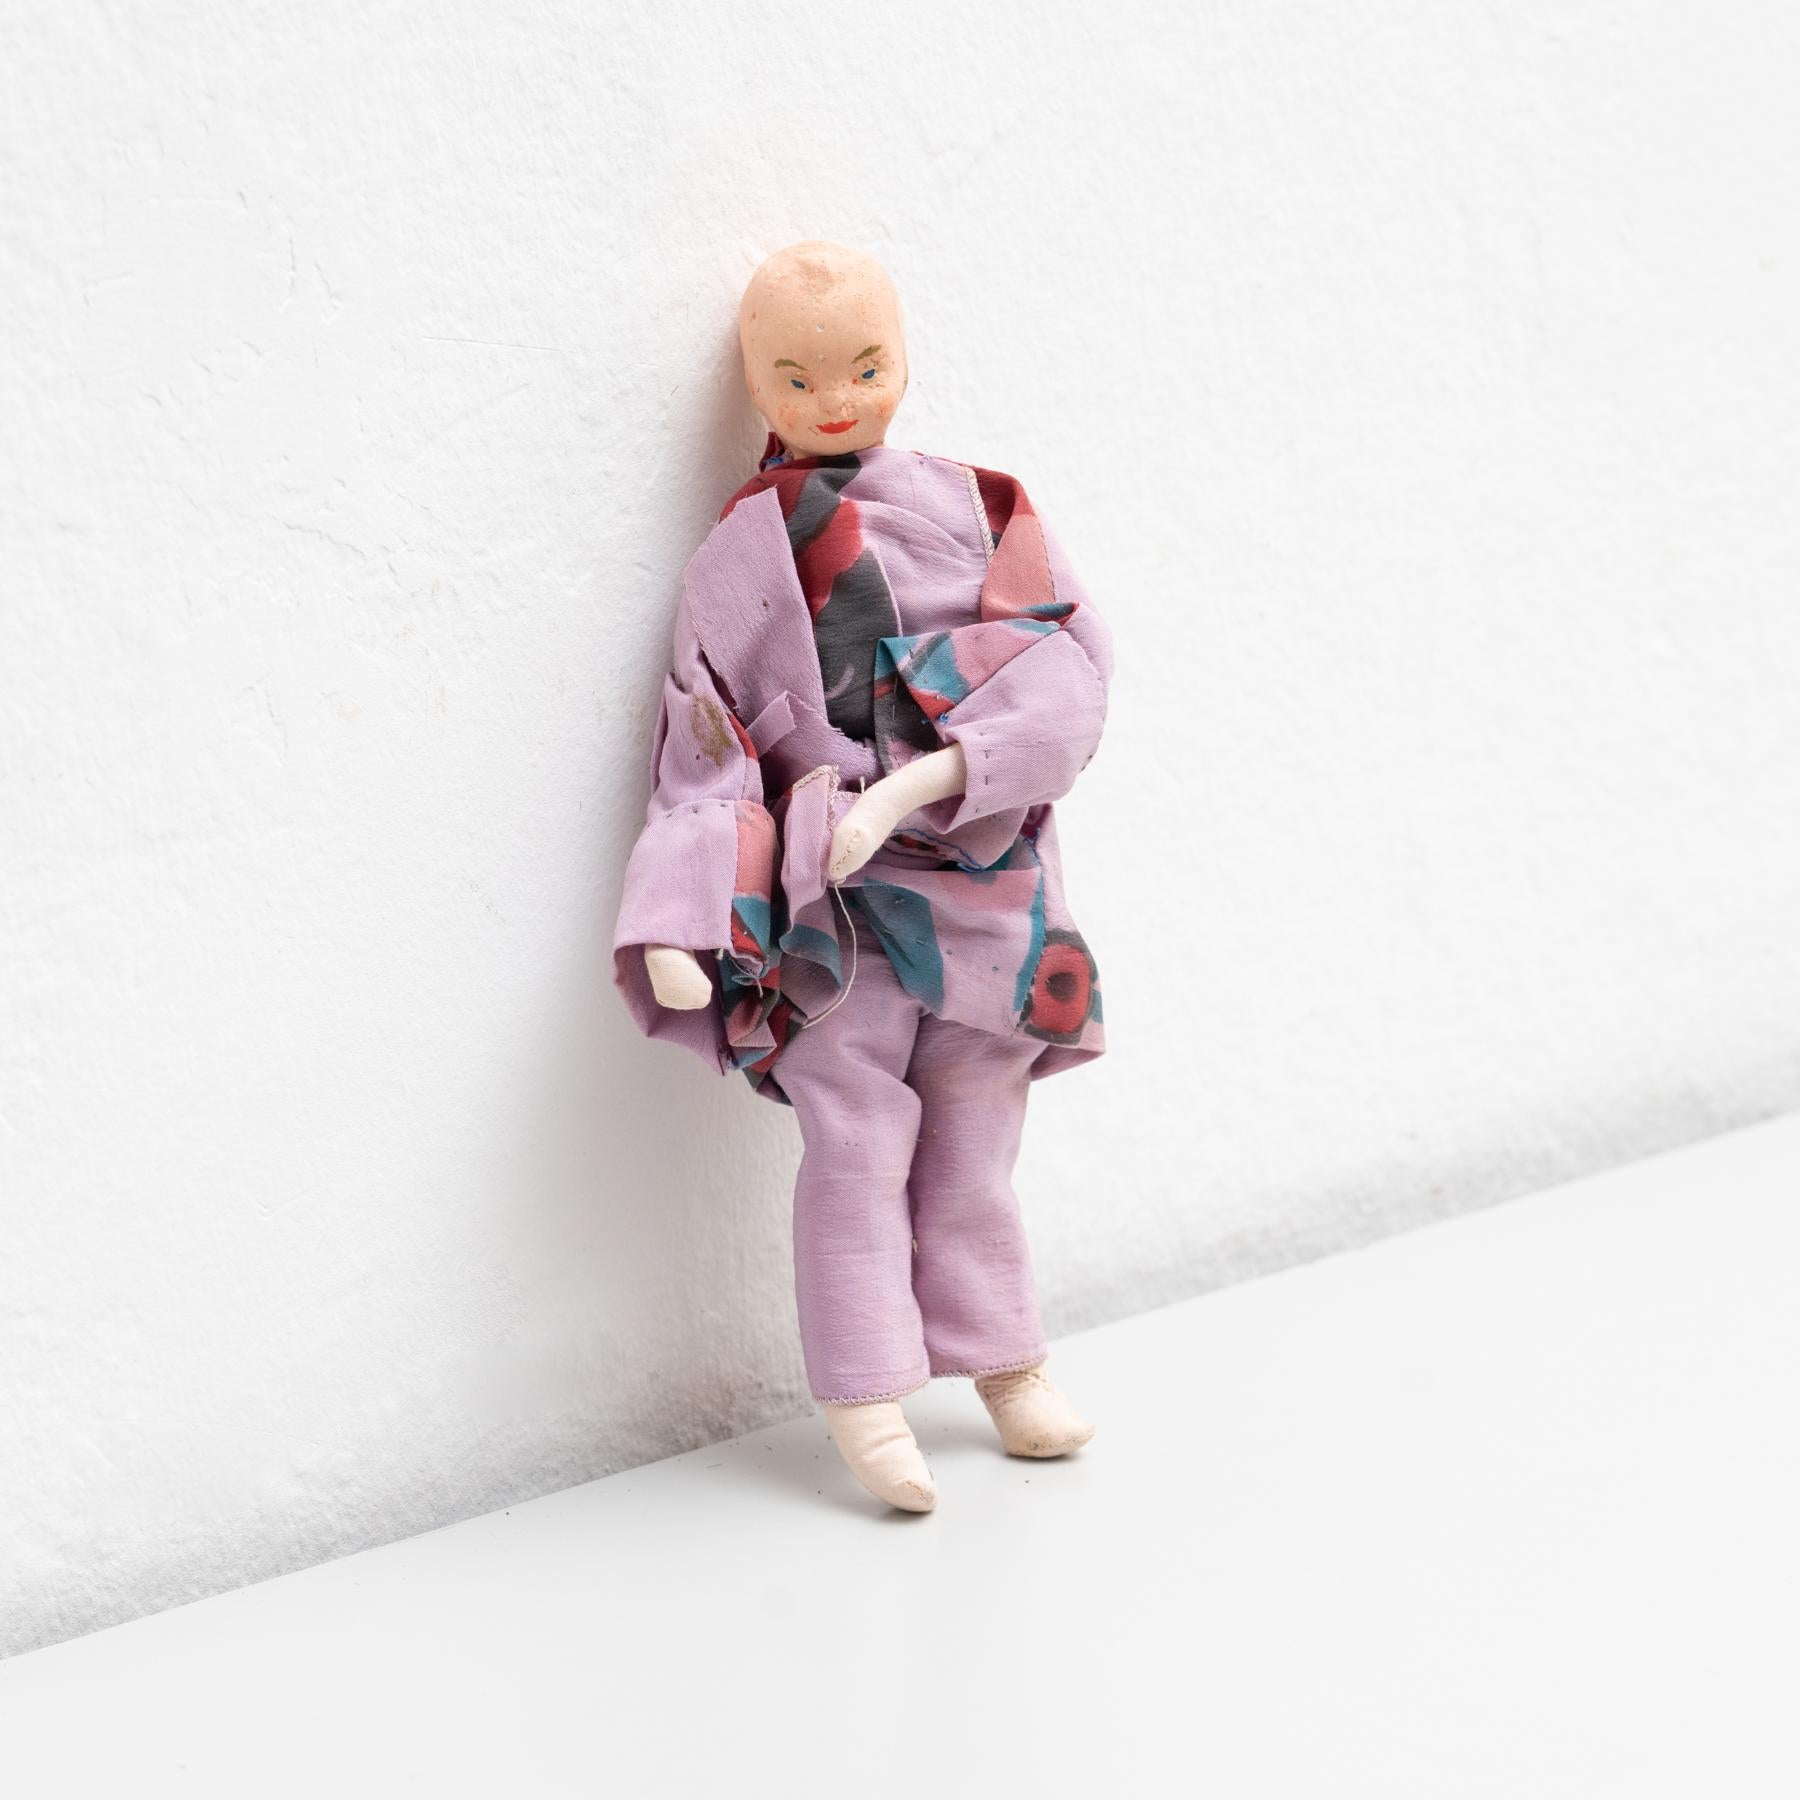 Antique early 20th century hand painted rag doll of woman dressed with a kimono. 

Manufactured circa 1920 in Spain.

In original condition, with minor wear consistent with age and use, preserving a beautiful